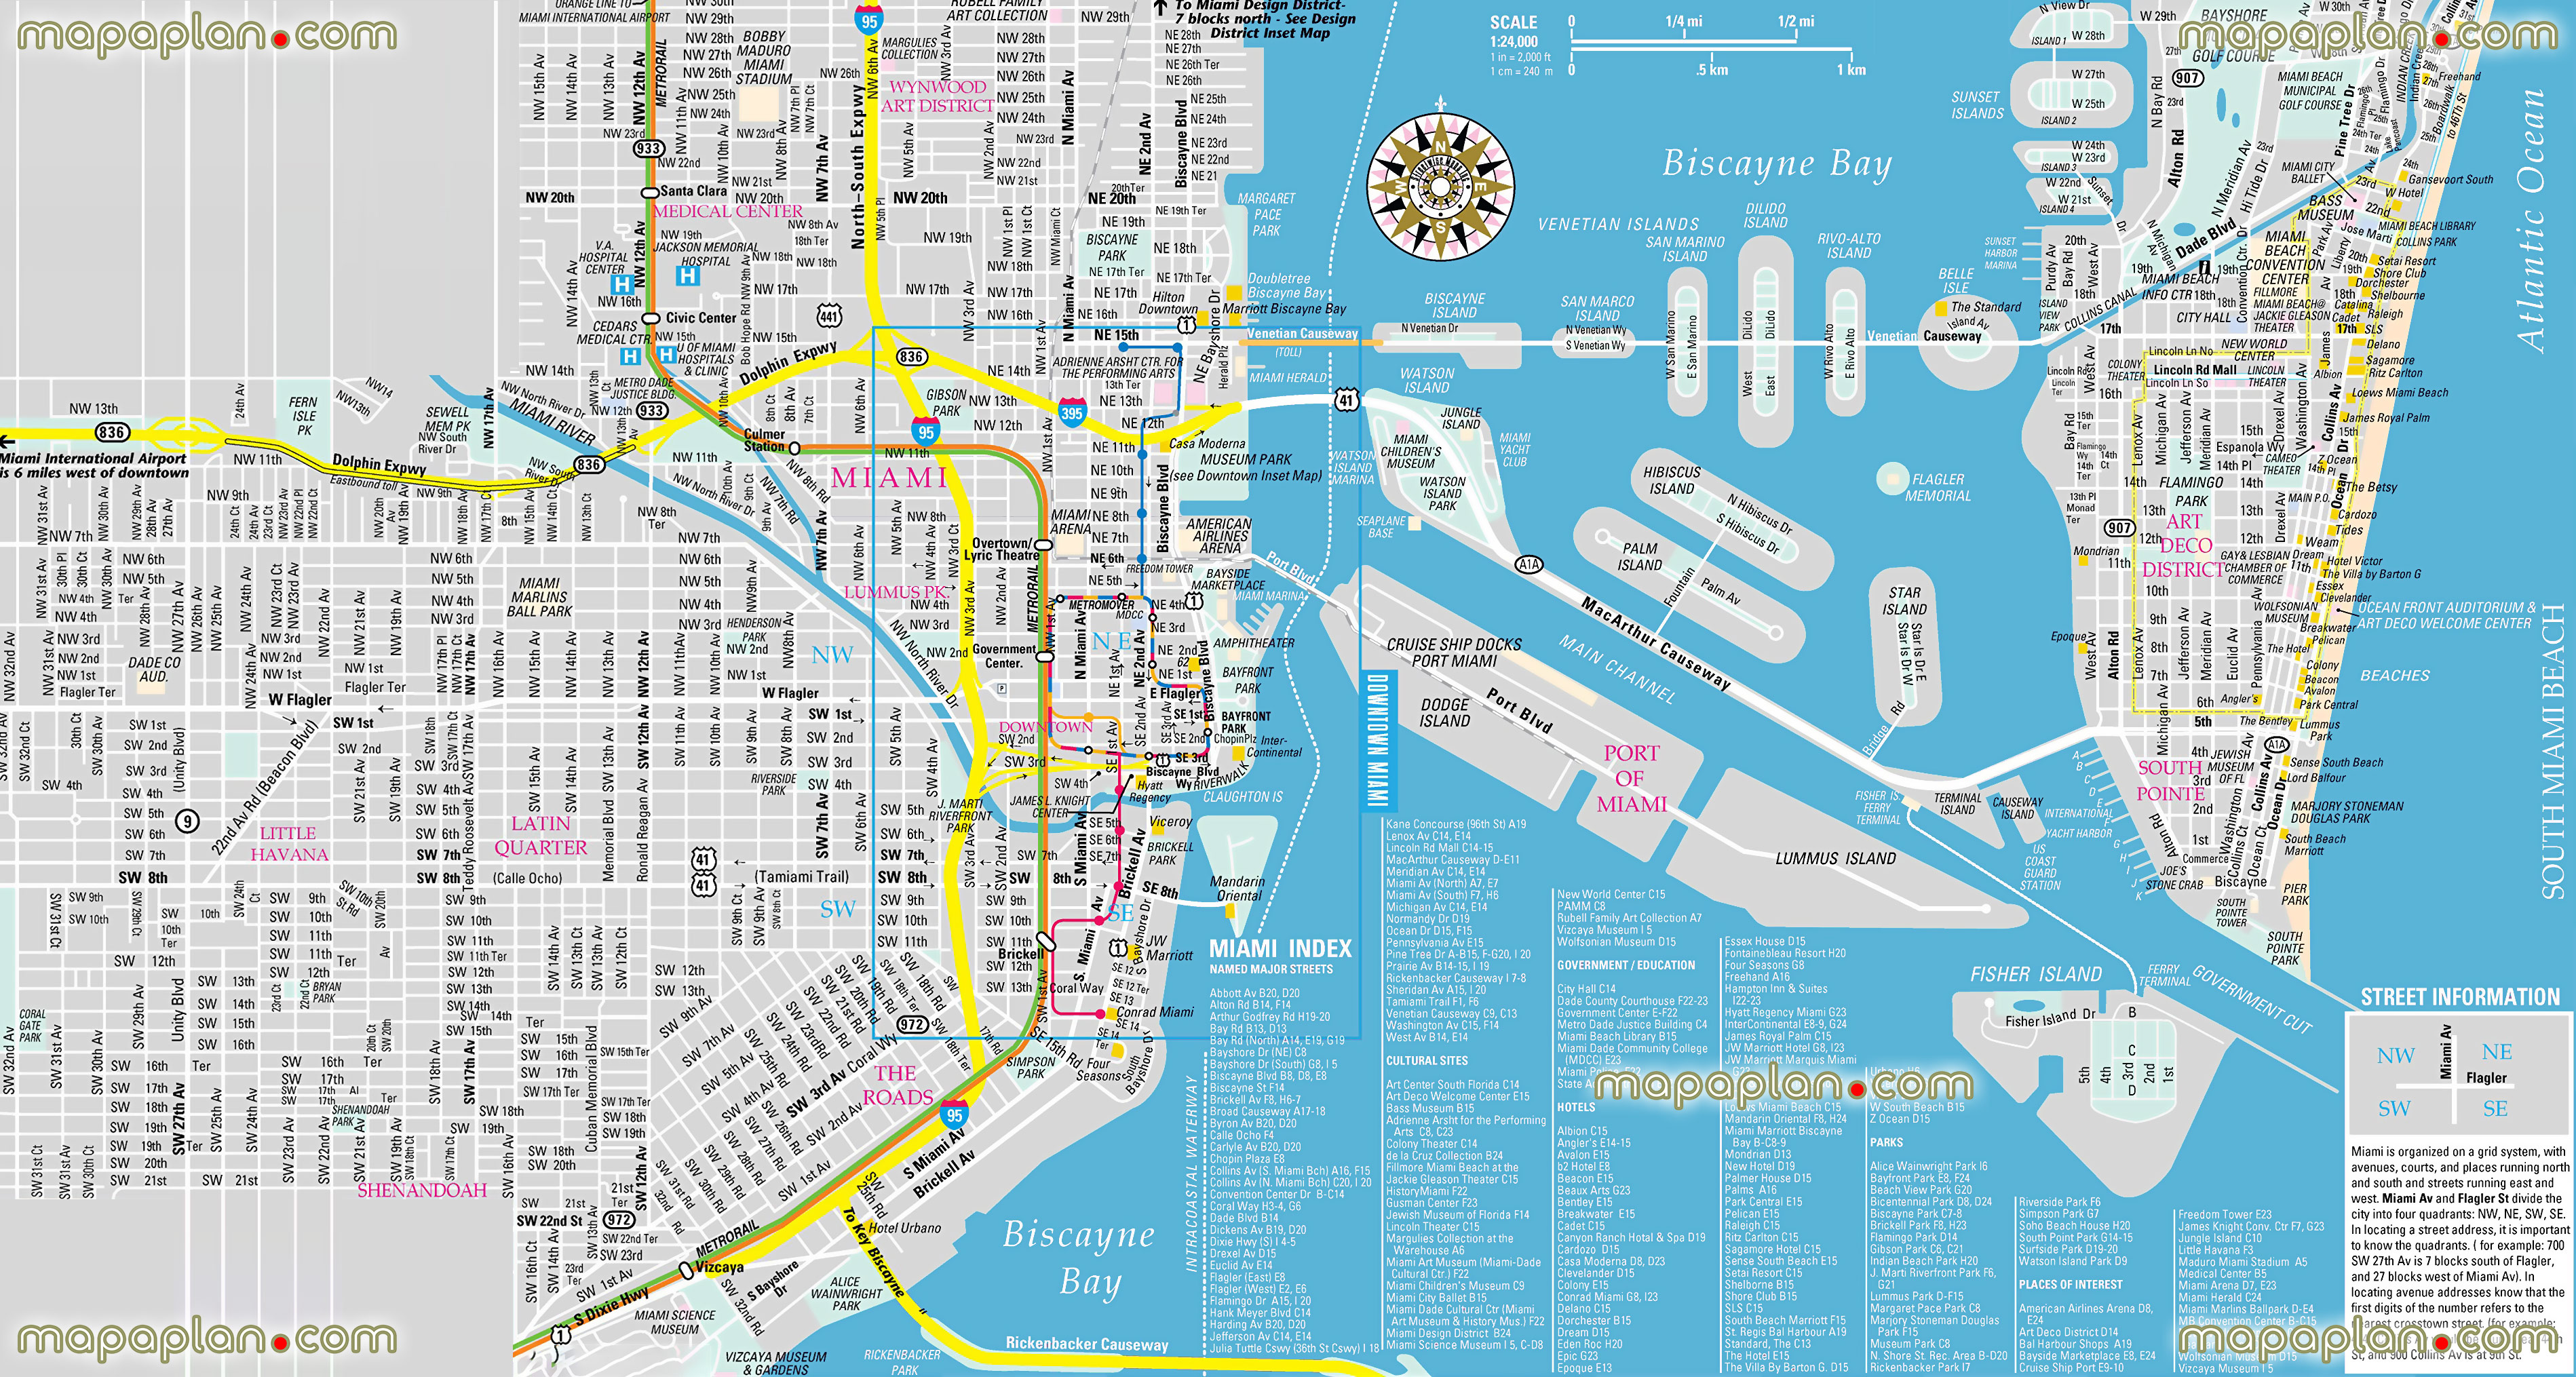 Miami beach city centre downtown free travel guide top 10 must see sights best destinations